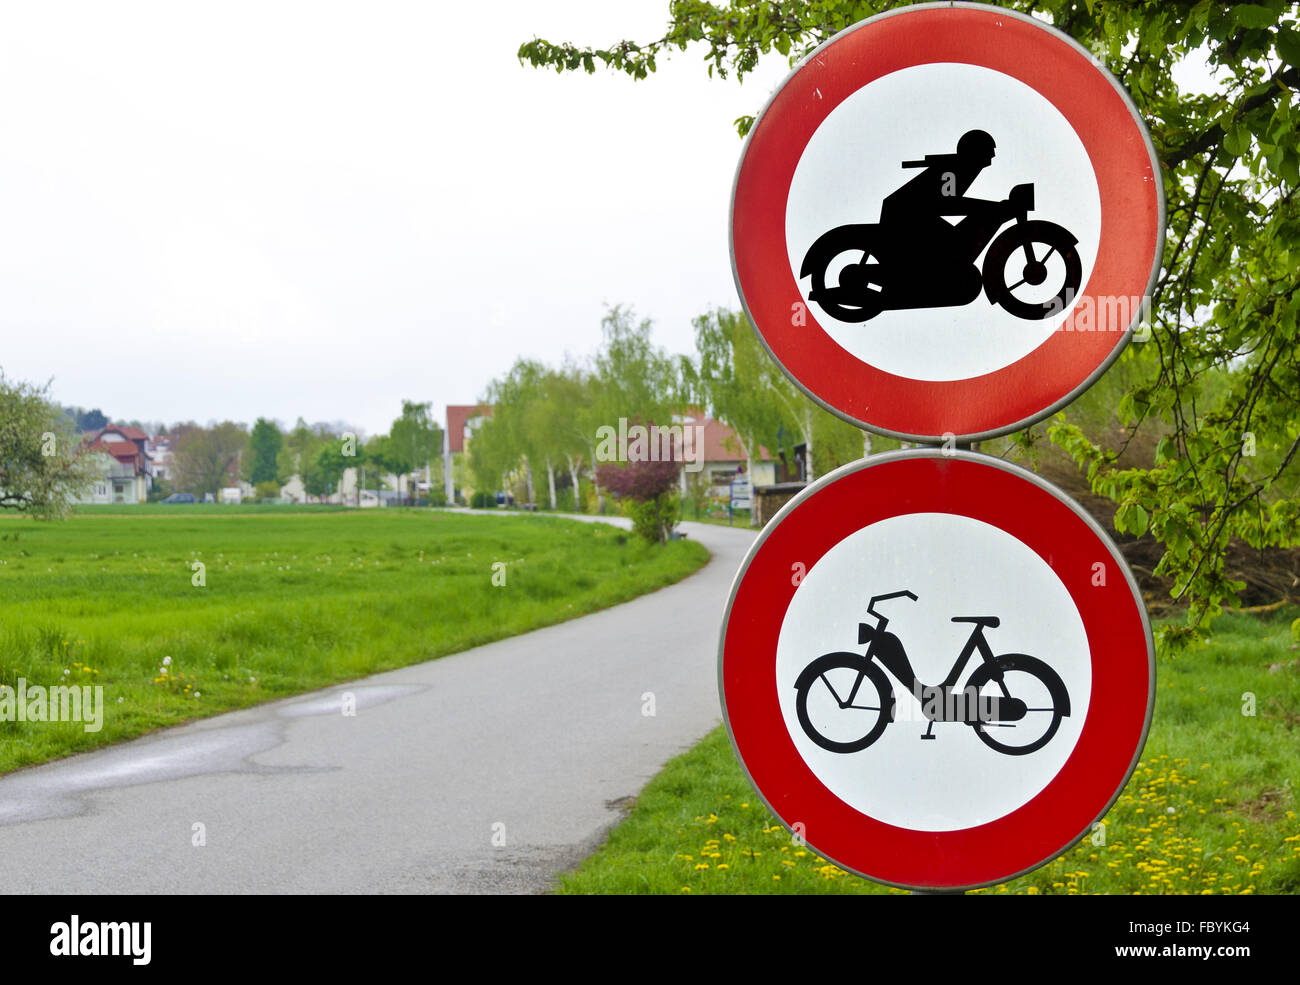 traffic signs driving ban for motorcycles Stock Photo